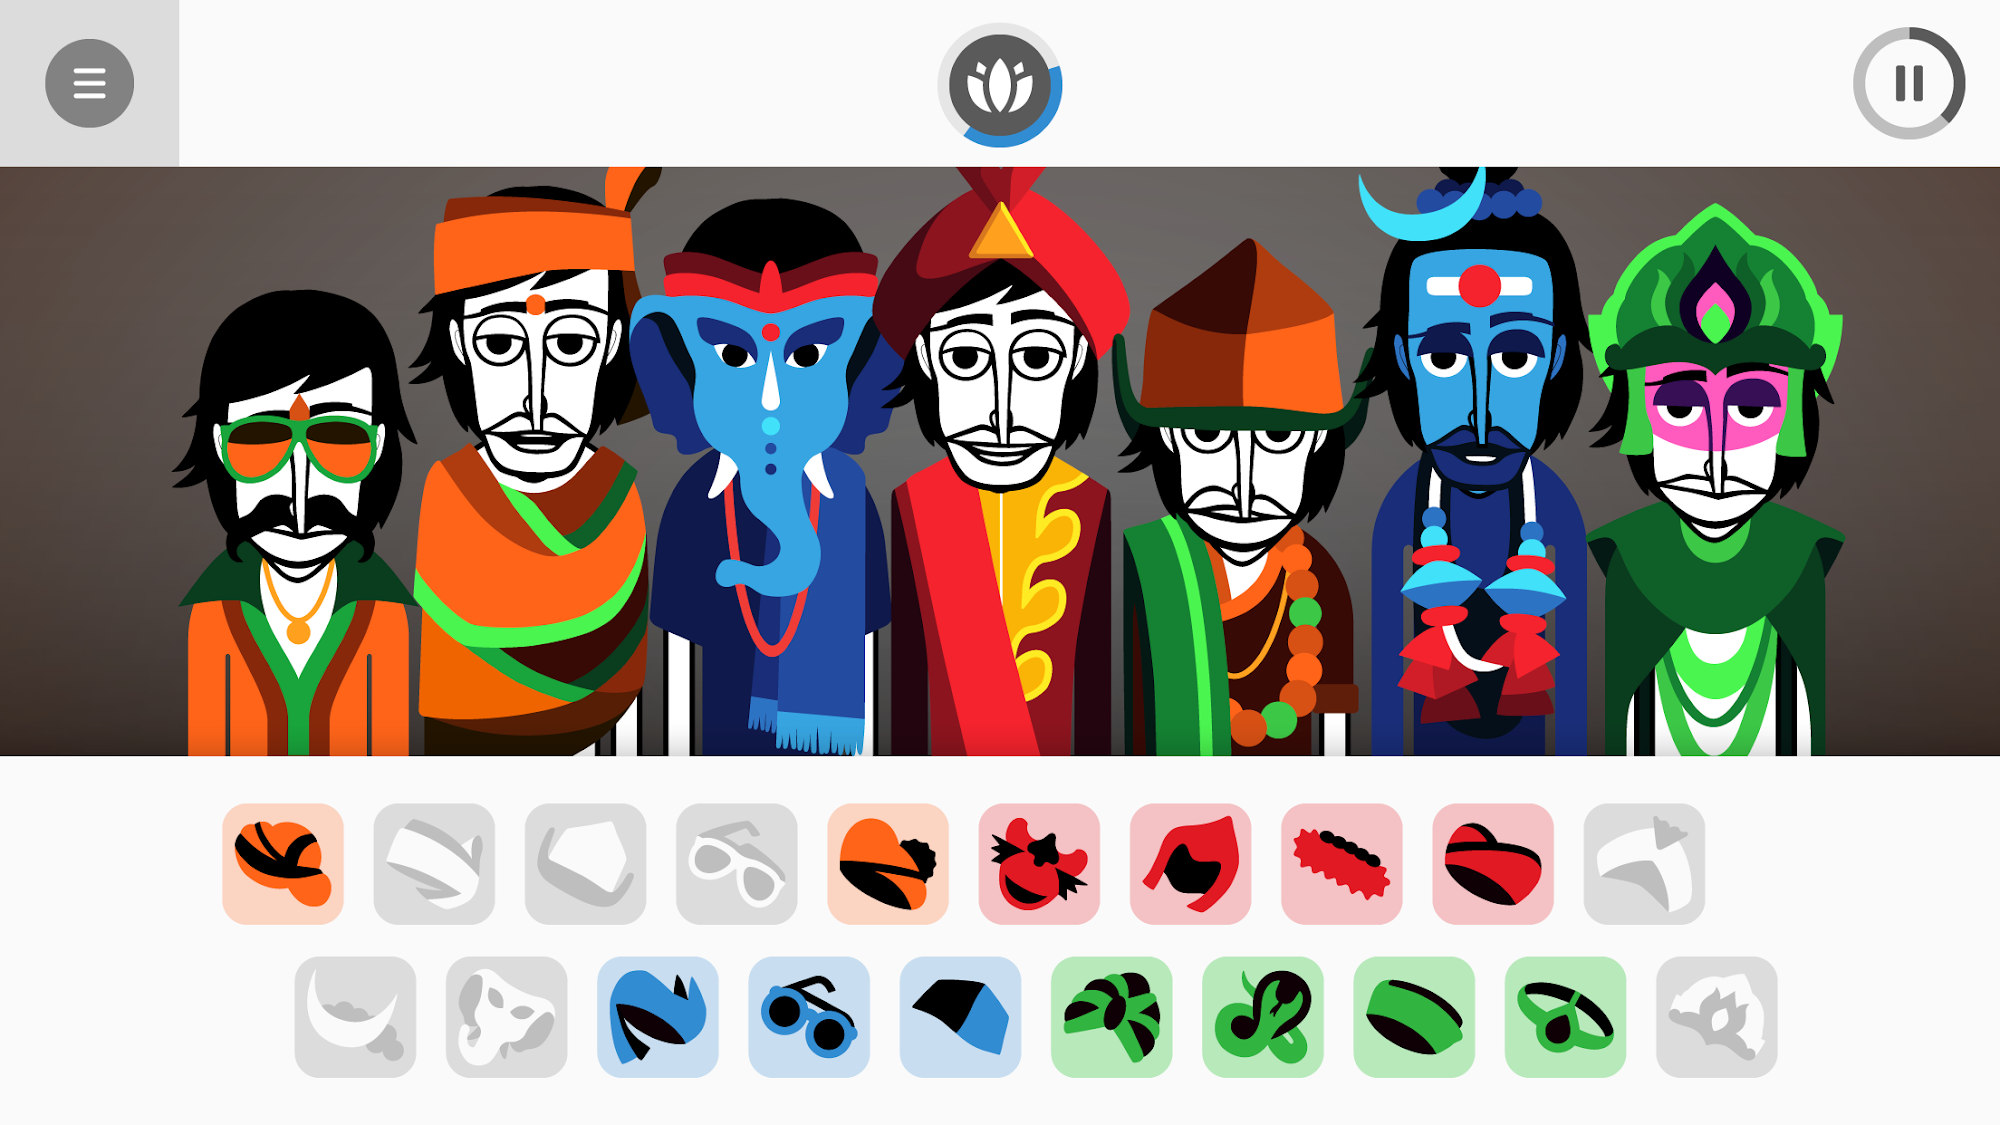 Incredibox for Android